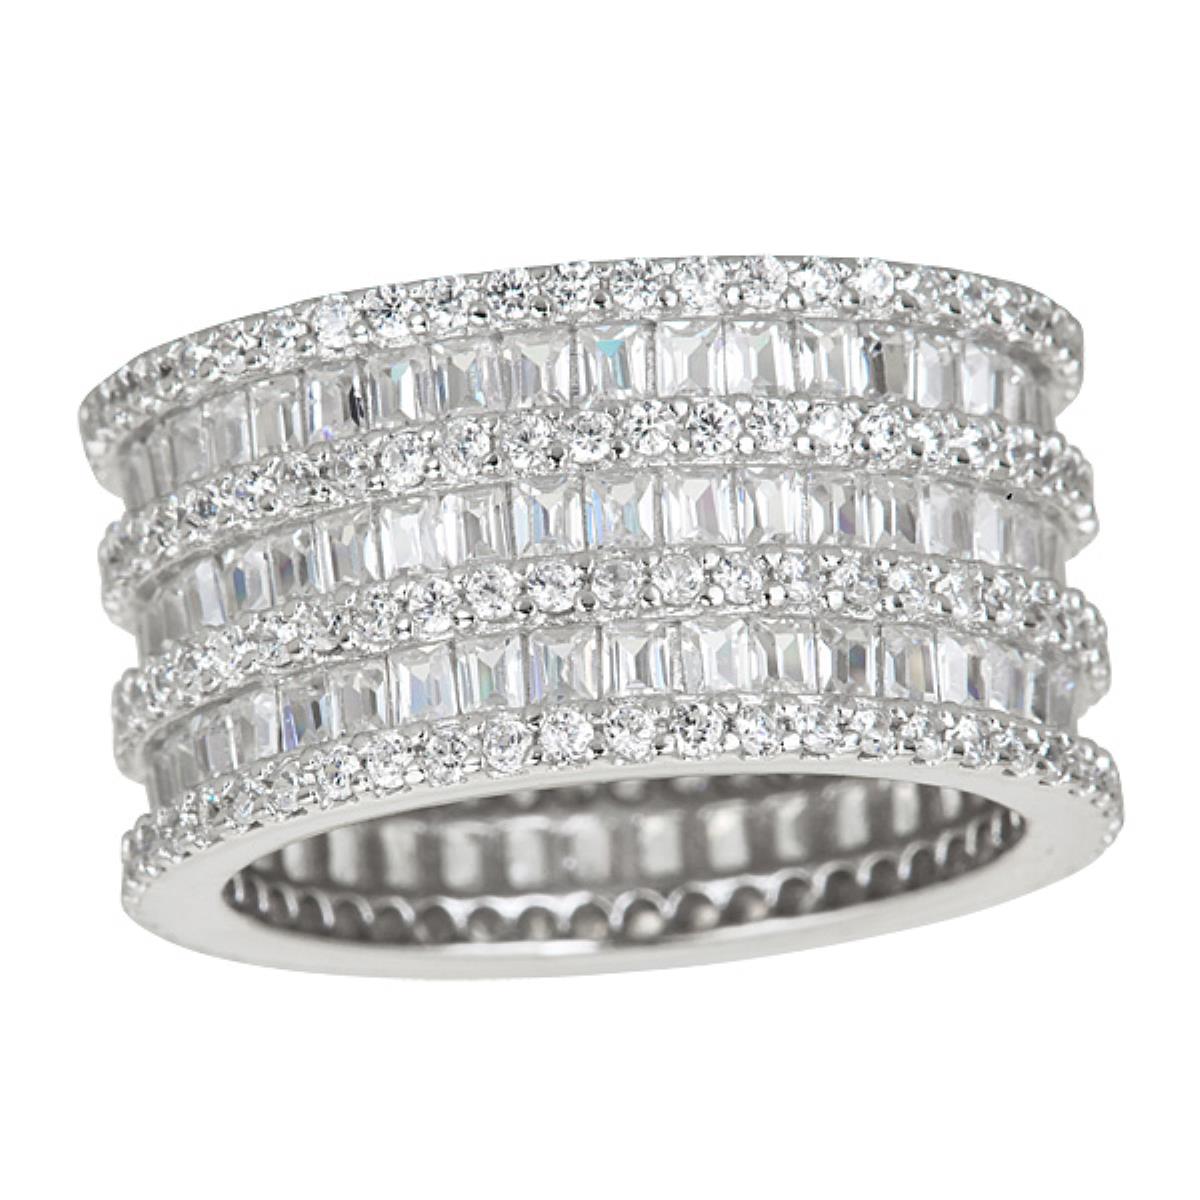 Sterling Silver 3 Row Baguette Eternity Ring